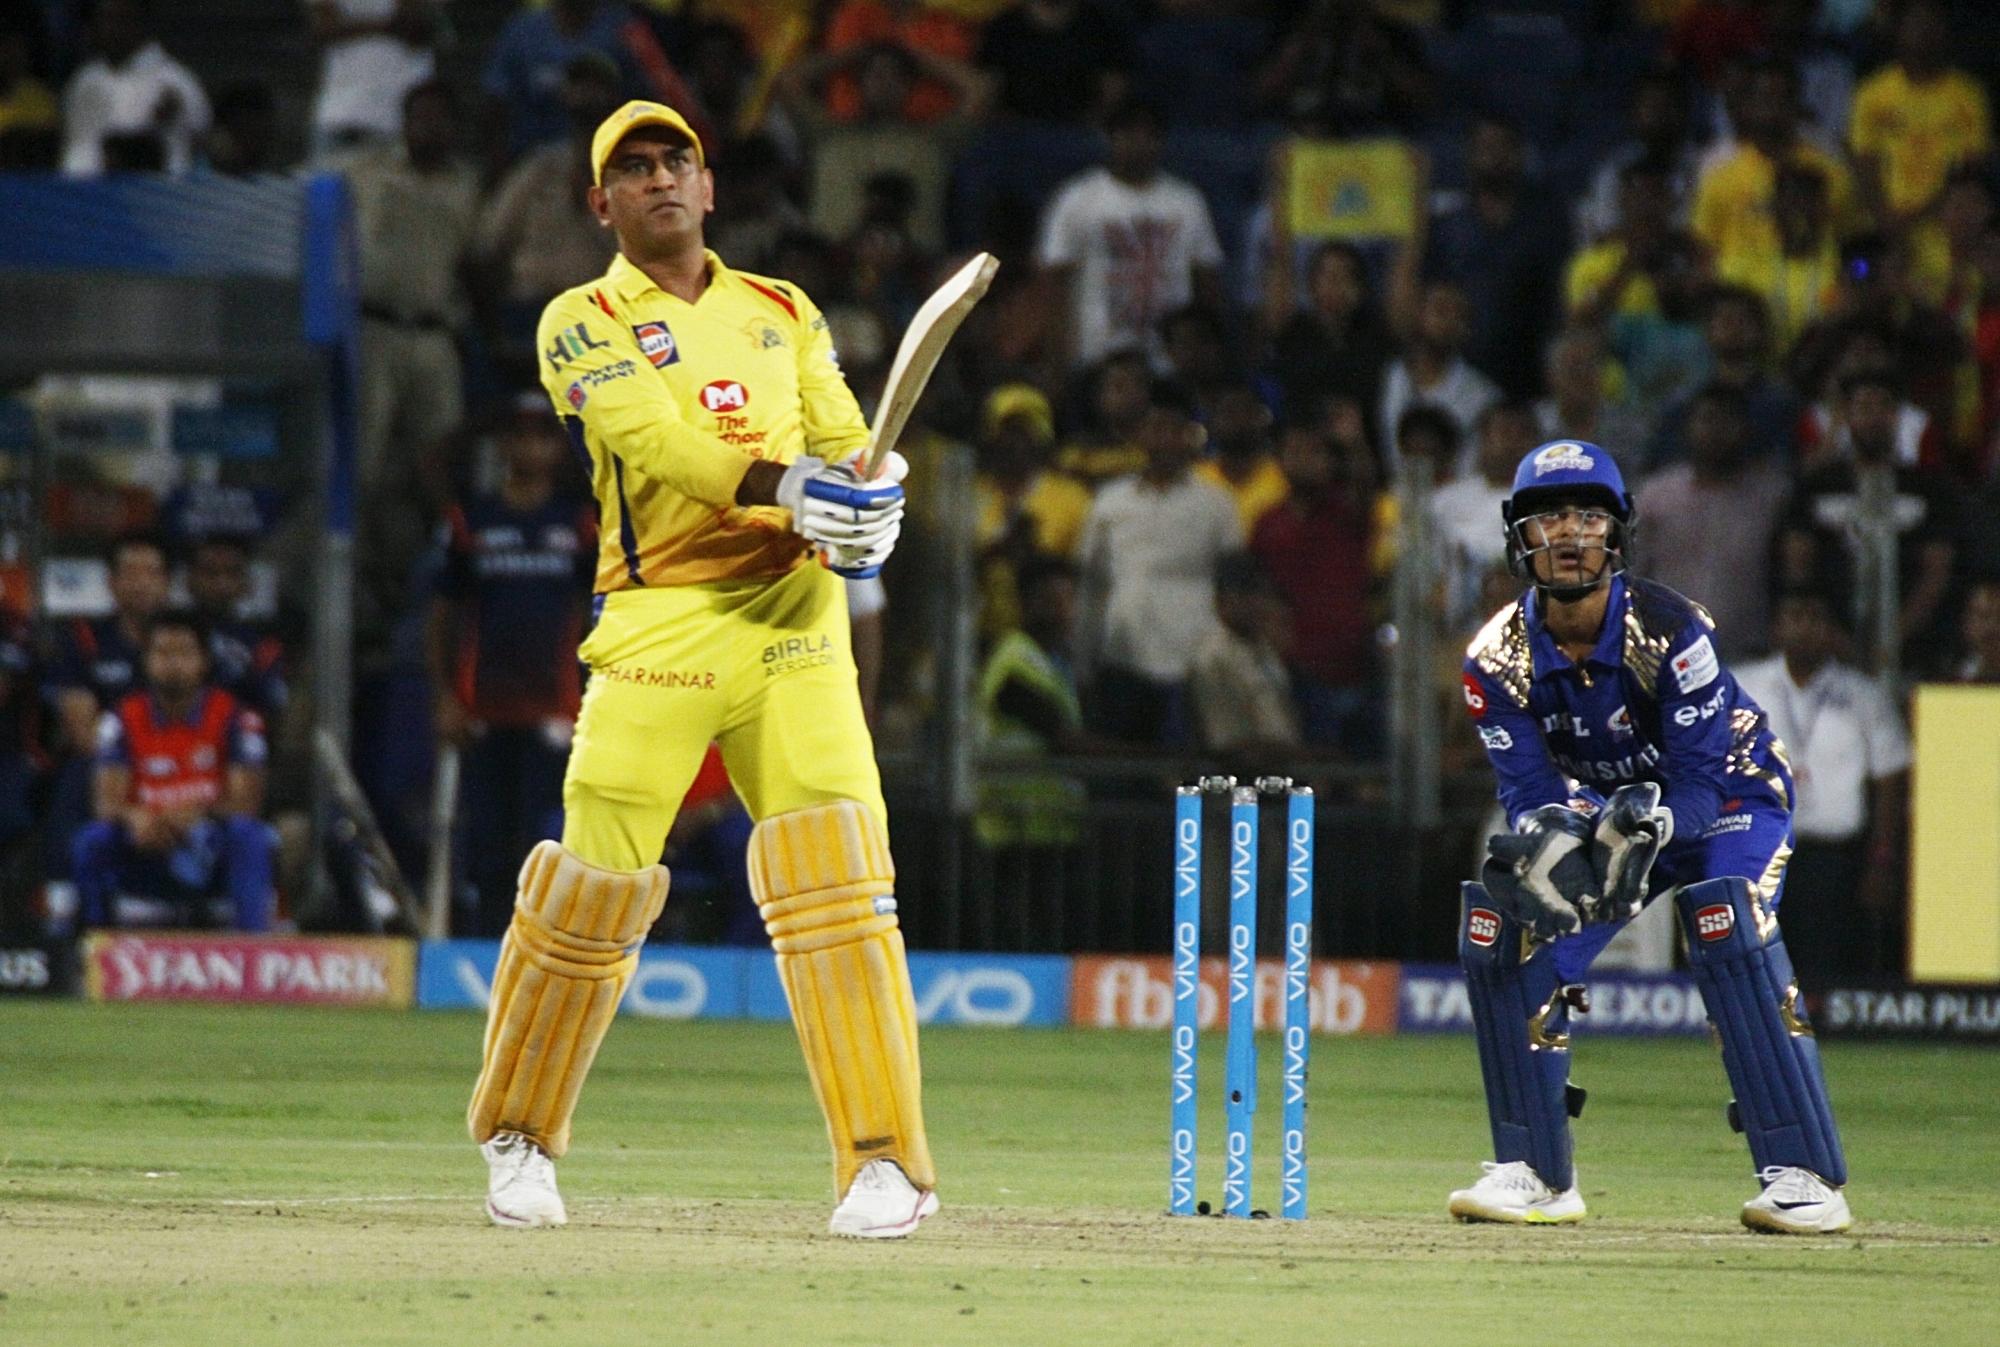 IPL 2018: Match 30 (CSK vs DD) – 5 Players To Look Out For - Page 2 of 5